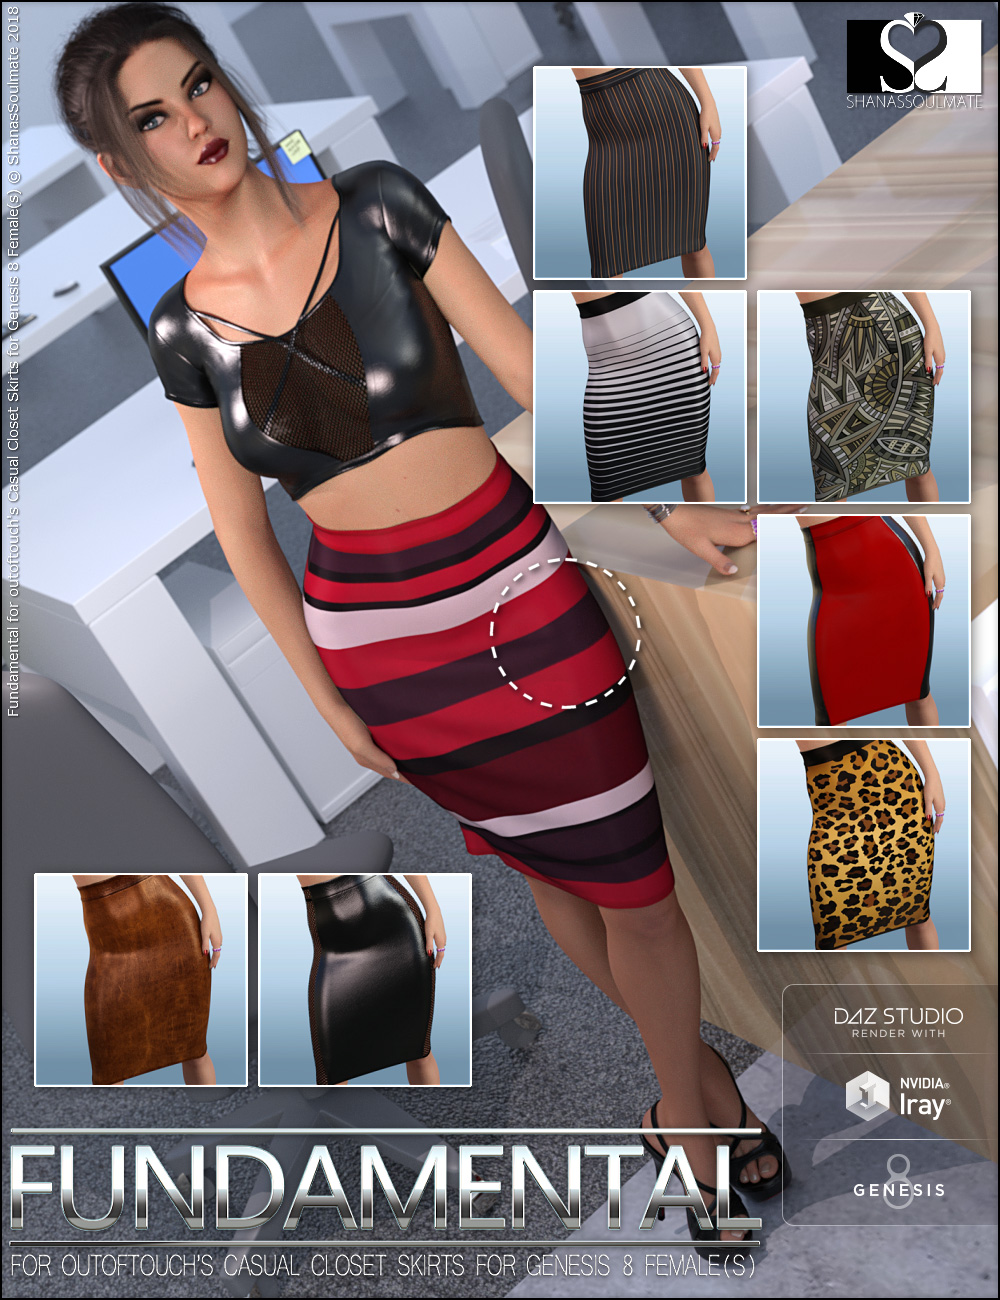 Fundamental Textures for OOT Casual Closet Skirt Collection by: ShanasSoulmate, 3D Models by Daz 3D